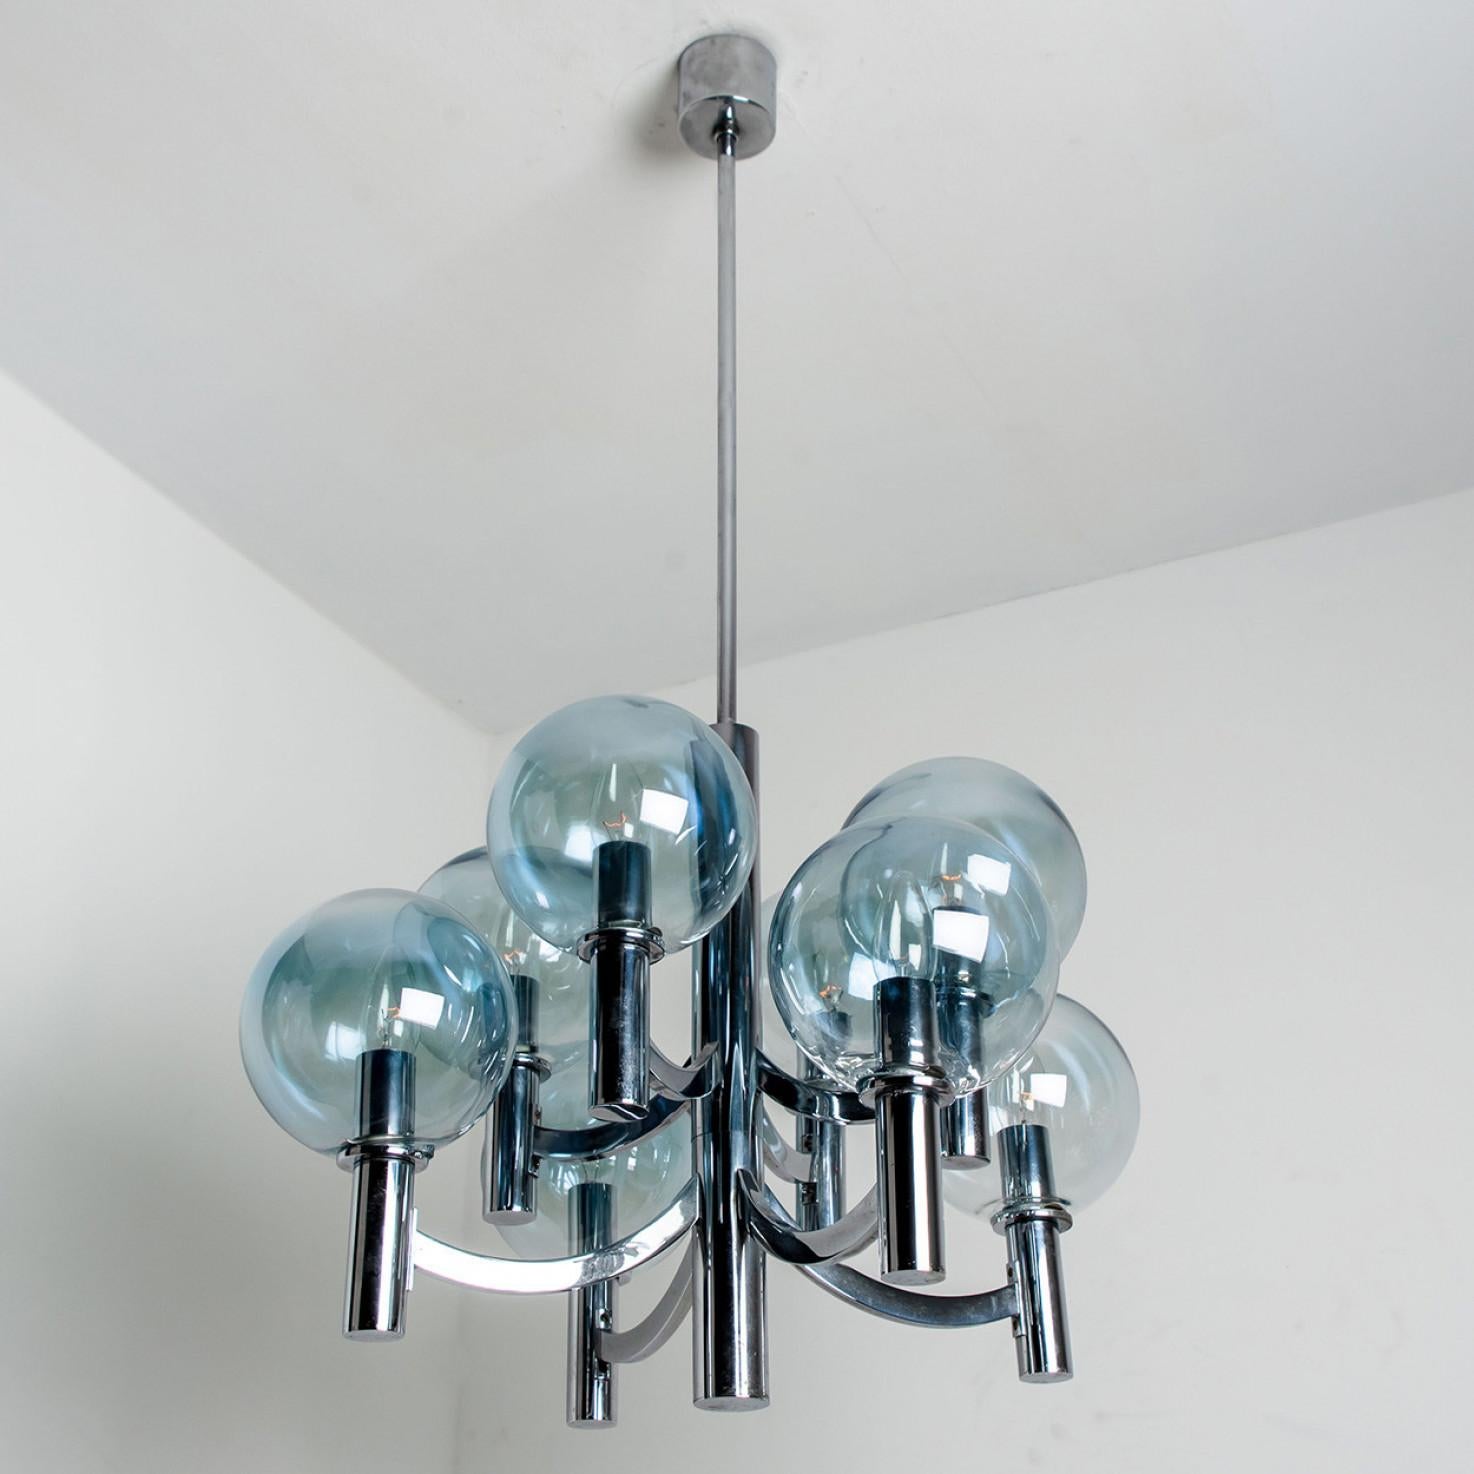 German Chrome and Light Blue Glass Chandelier in the style of Arne Jakobsson, 1970s For Sale